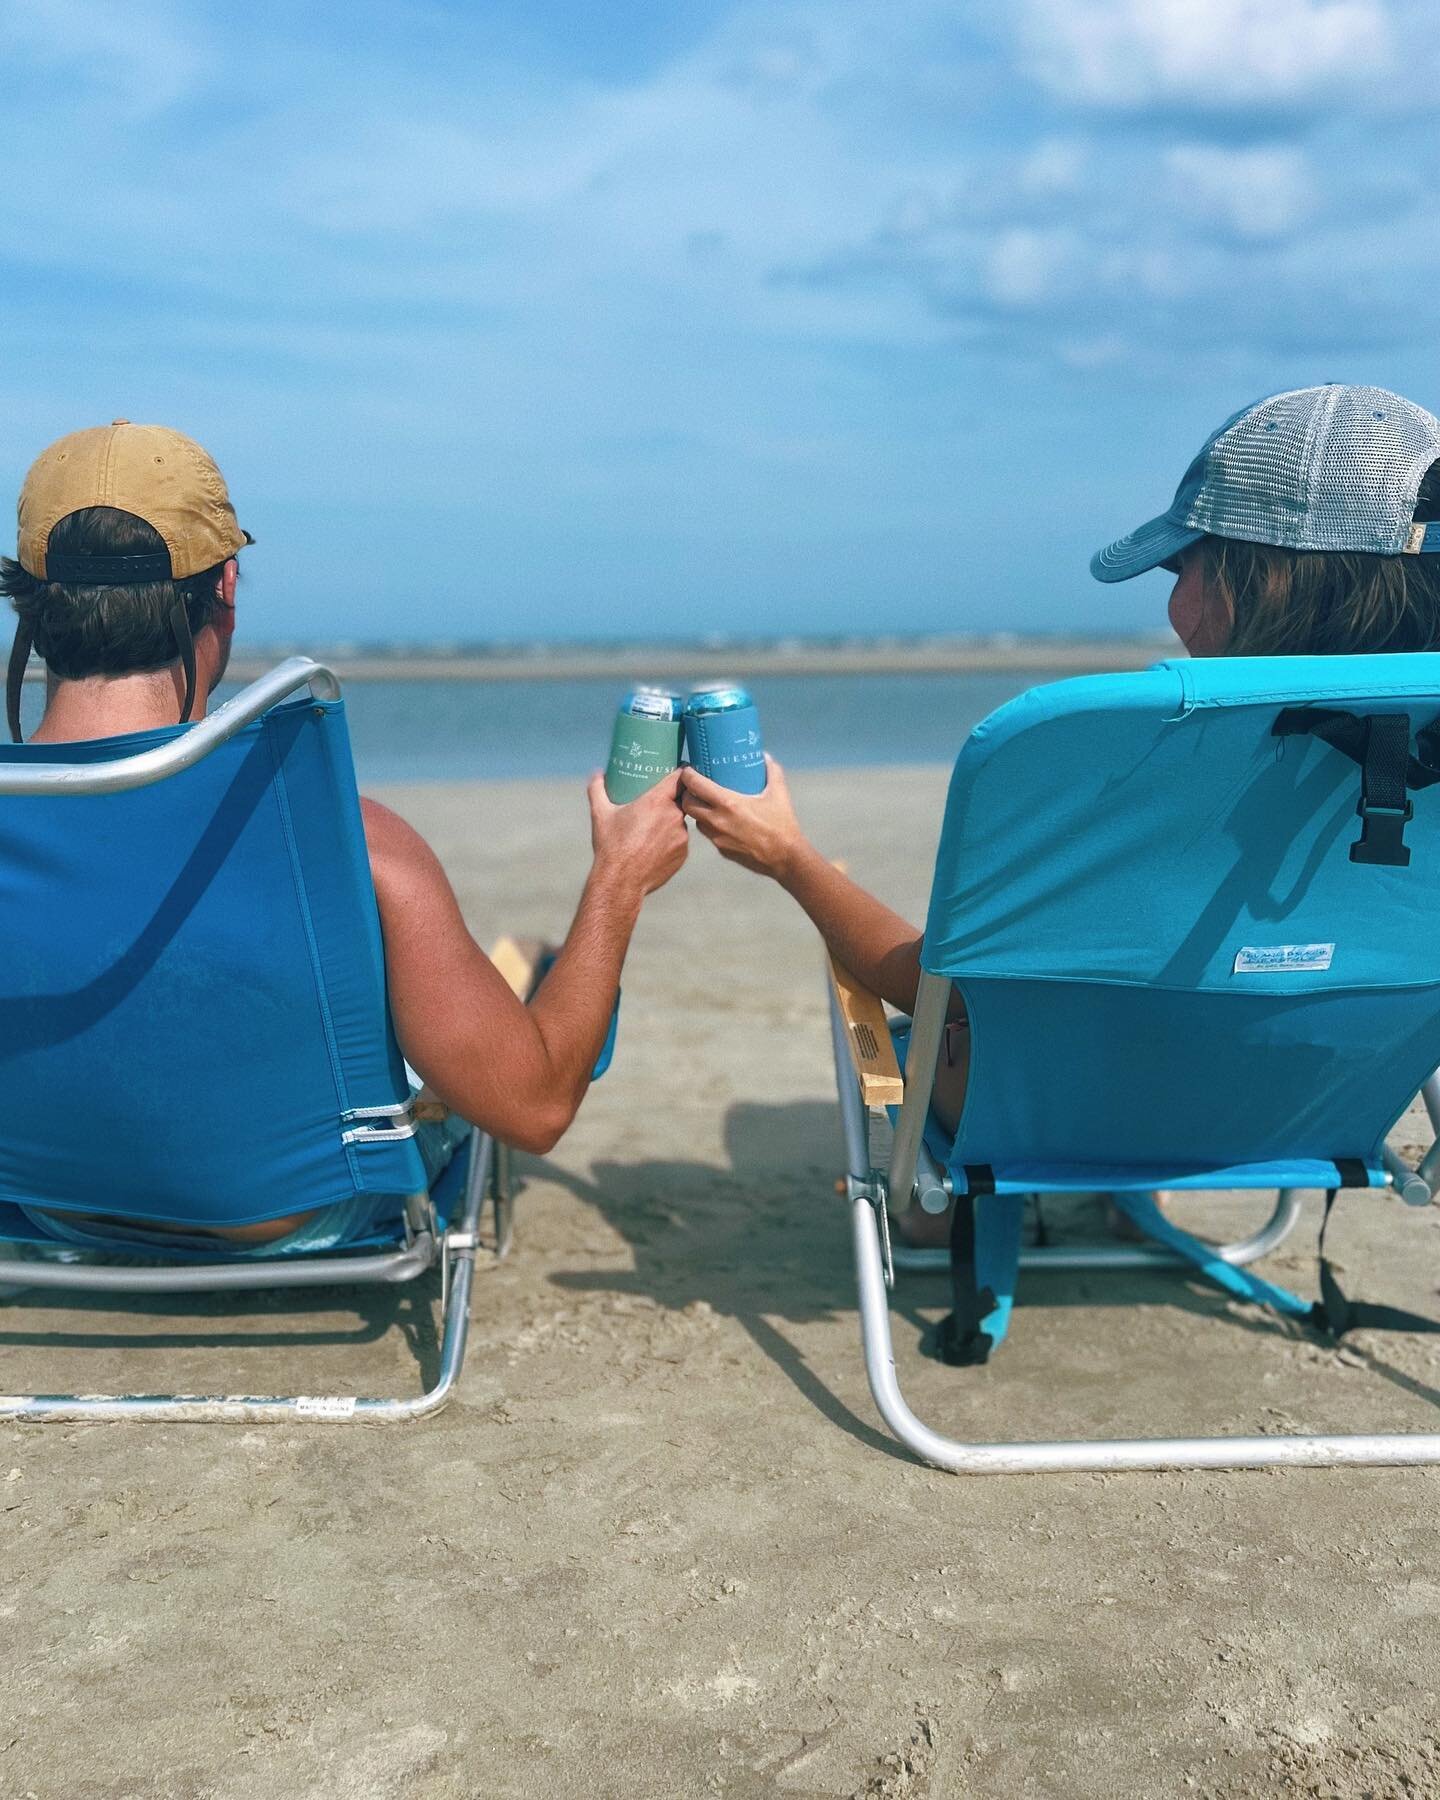 Cheers to summer⛱

Our properties are a quick 20 minutes to the beach&hellip; perfect for the Fourth! 

#guesthousecharleston #luxuryvacationrentals #fourthofjuly #sullivansisland